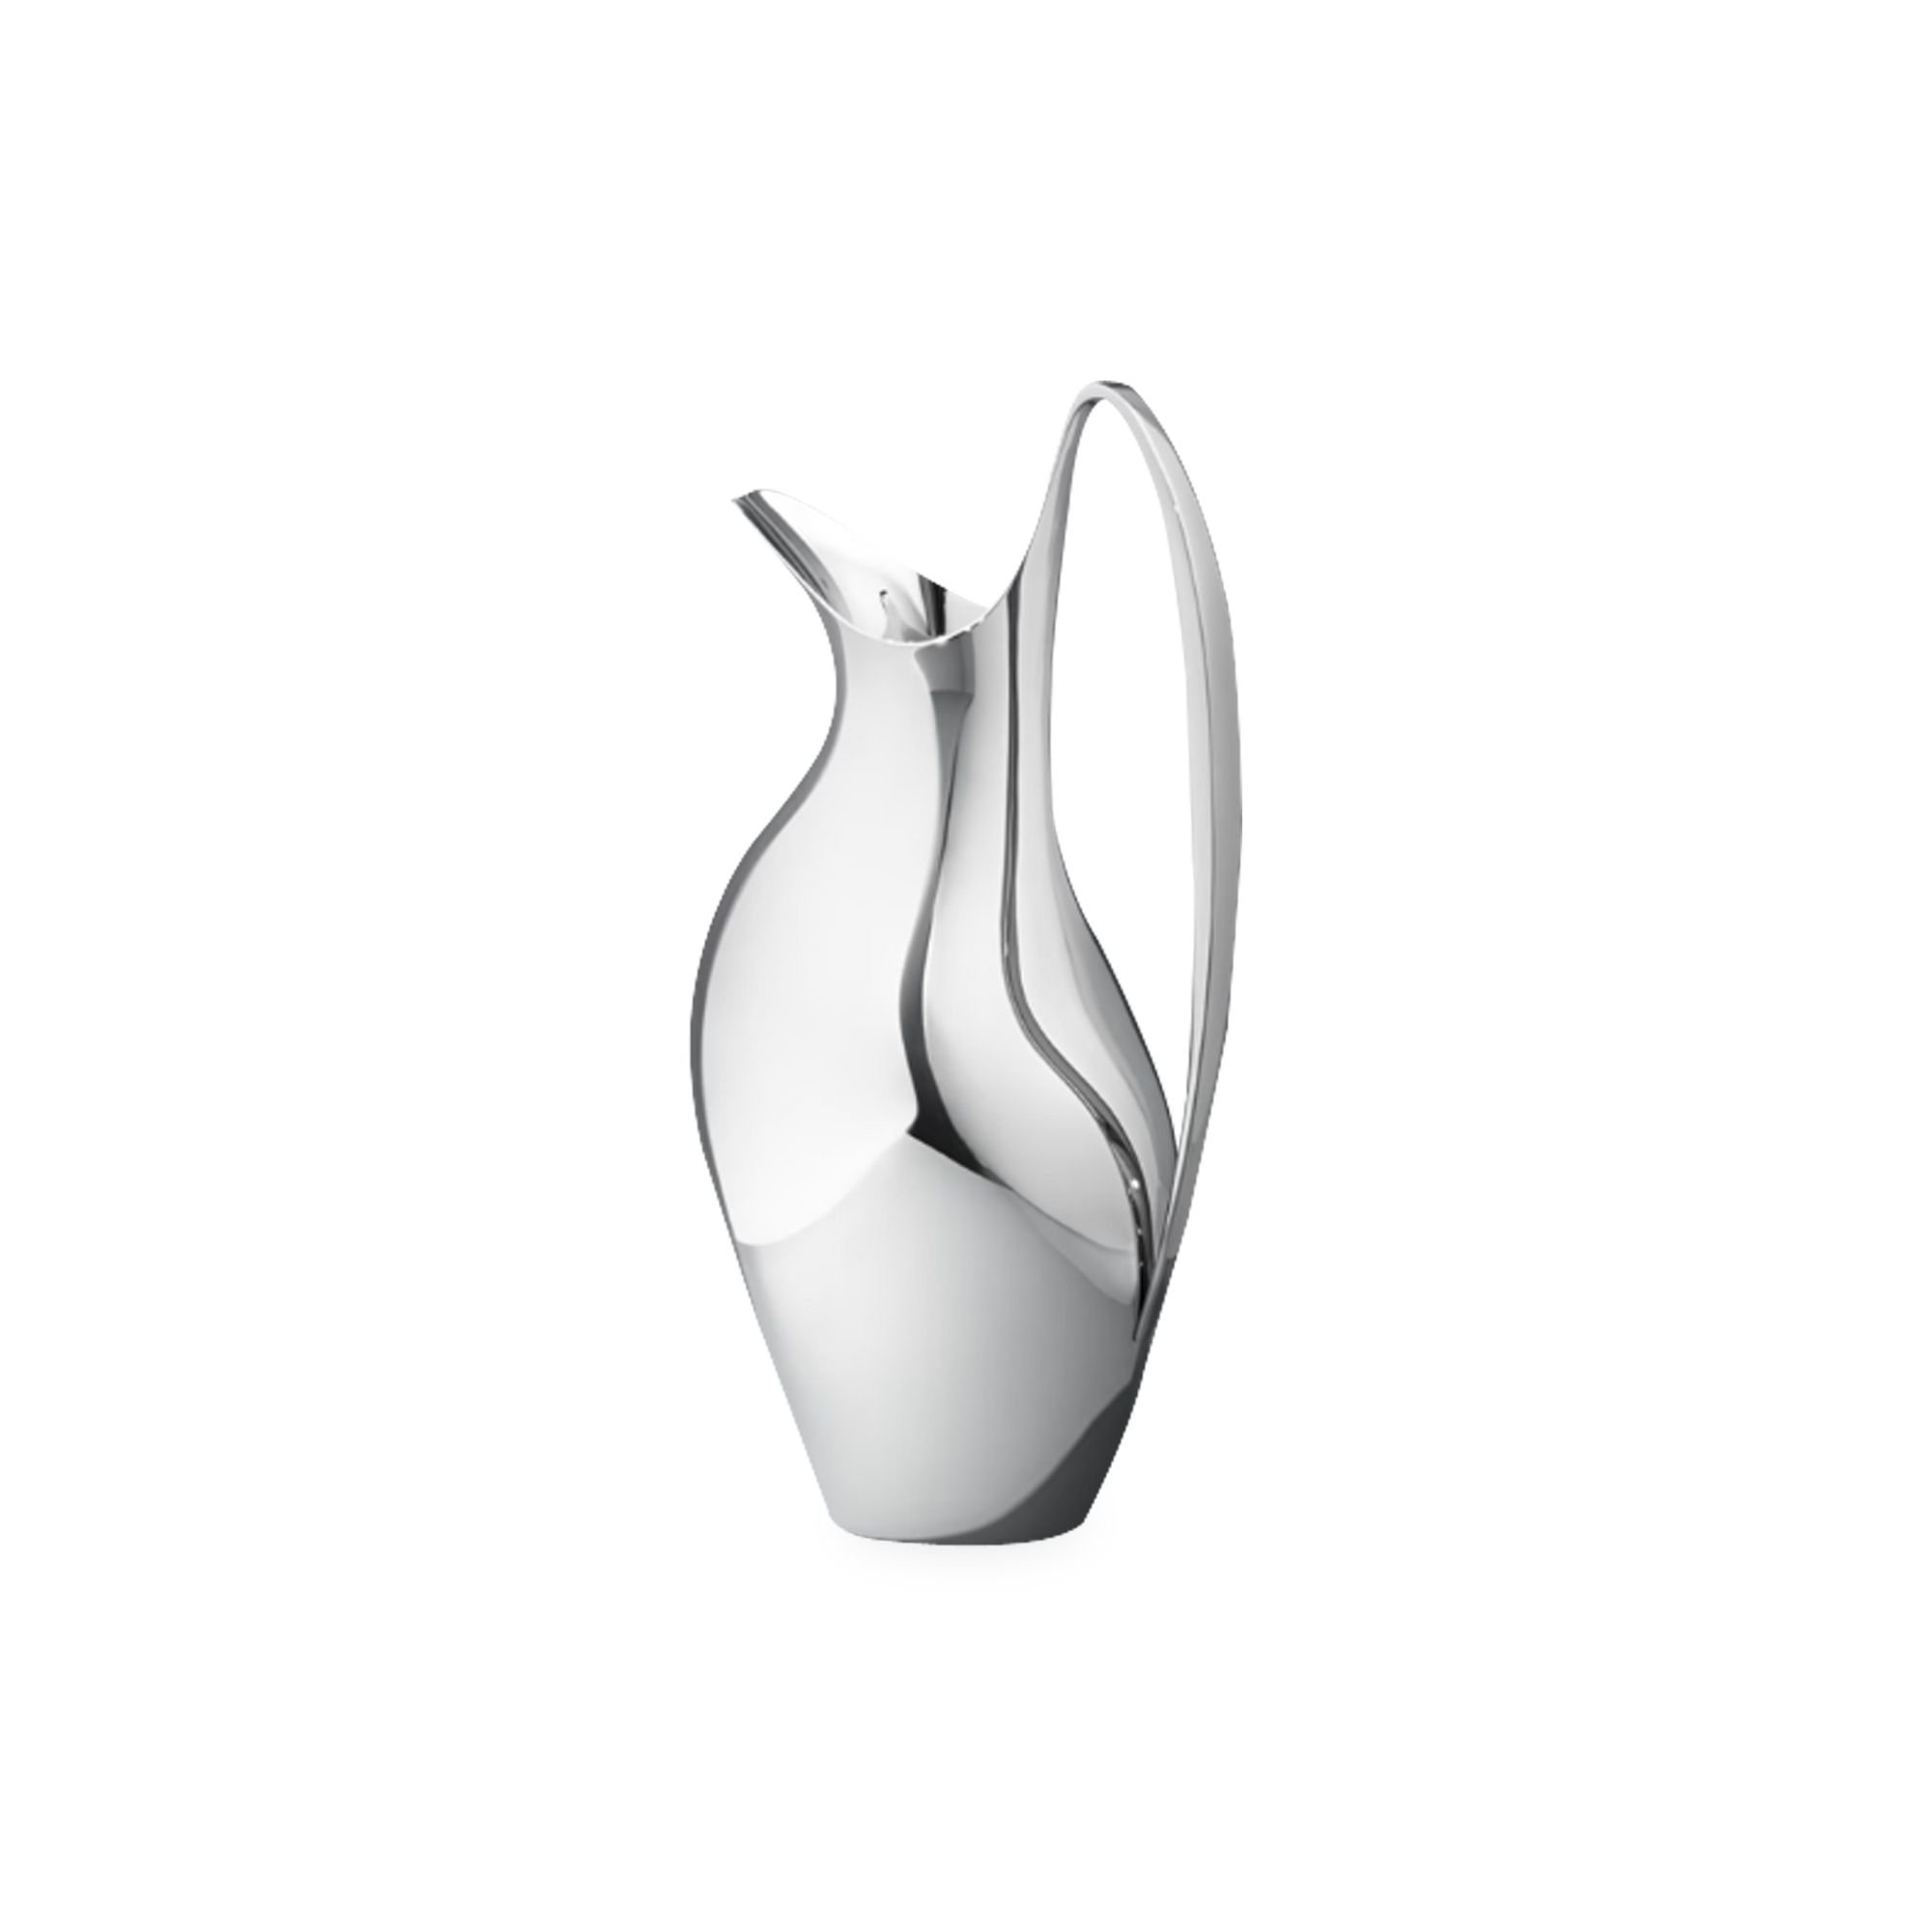 First designed by sculptor Henning Koppel in the 1950's and defined by a sculptural look, the Koppel Pitcher has established itself as a timeless house icon and a landmark in the h